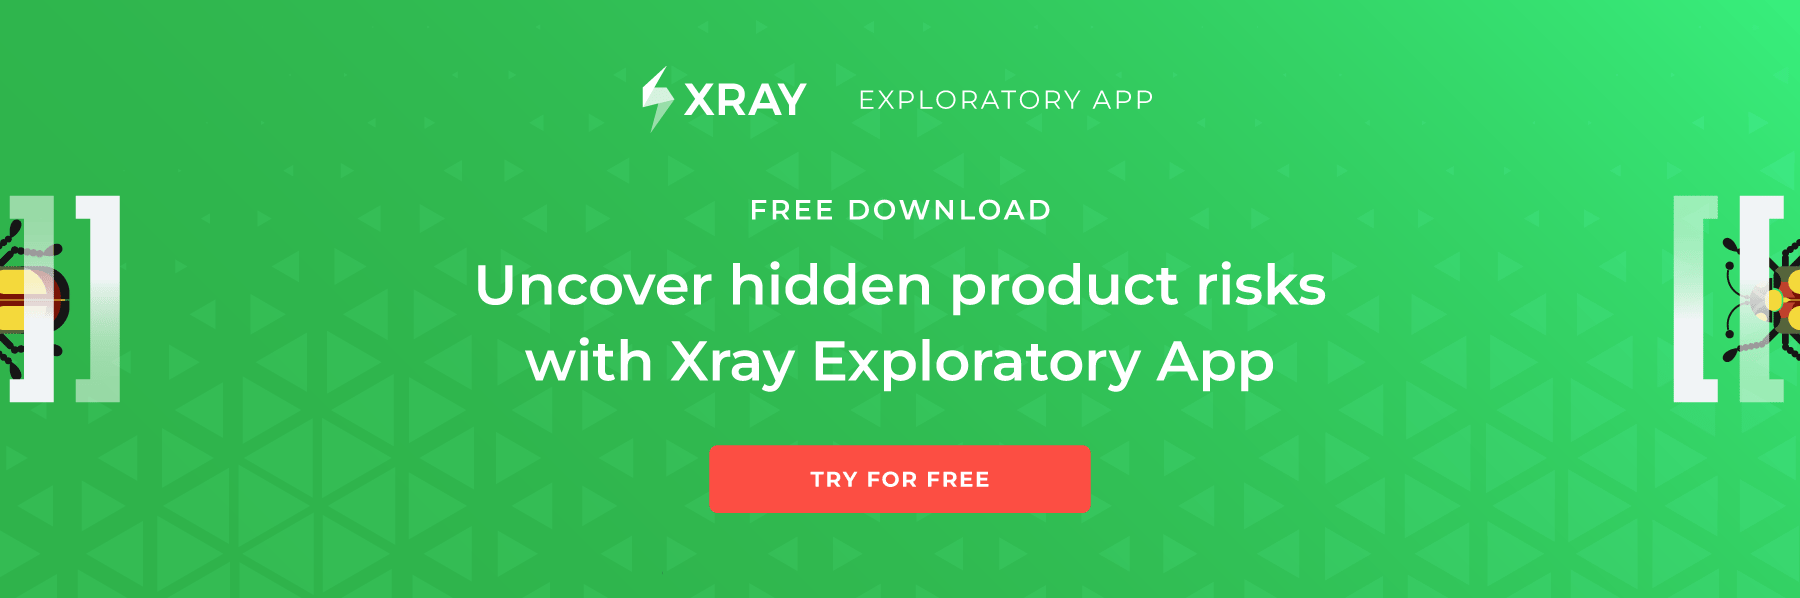 Xray-Exploratory App uncover risks banner